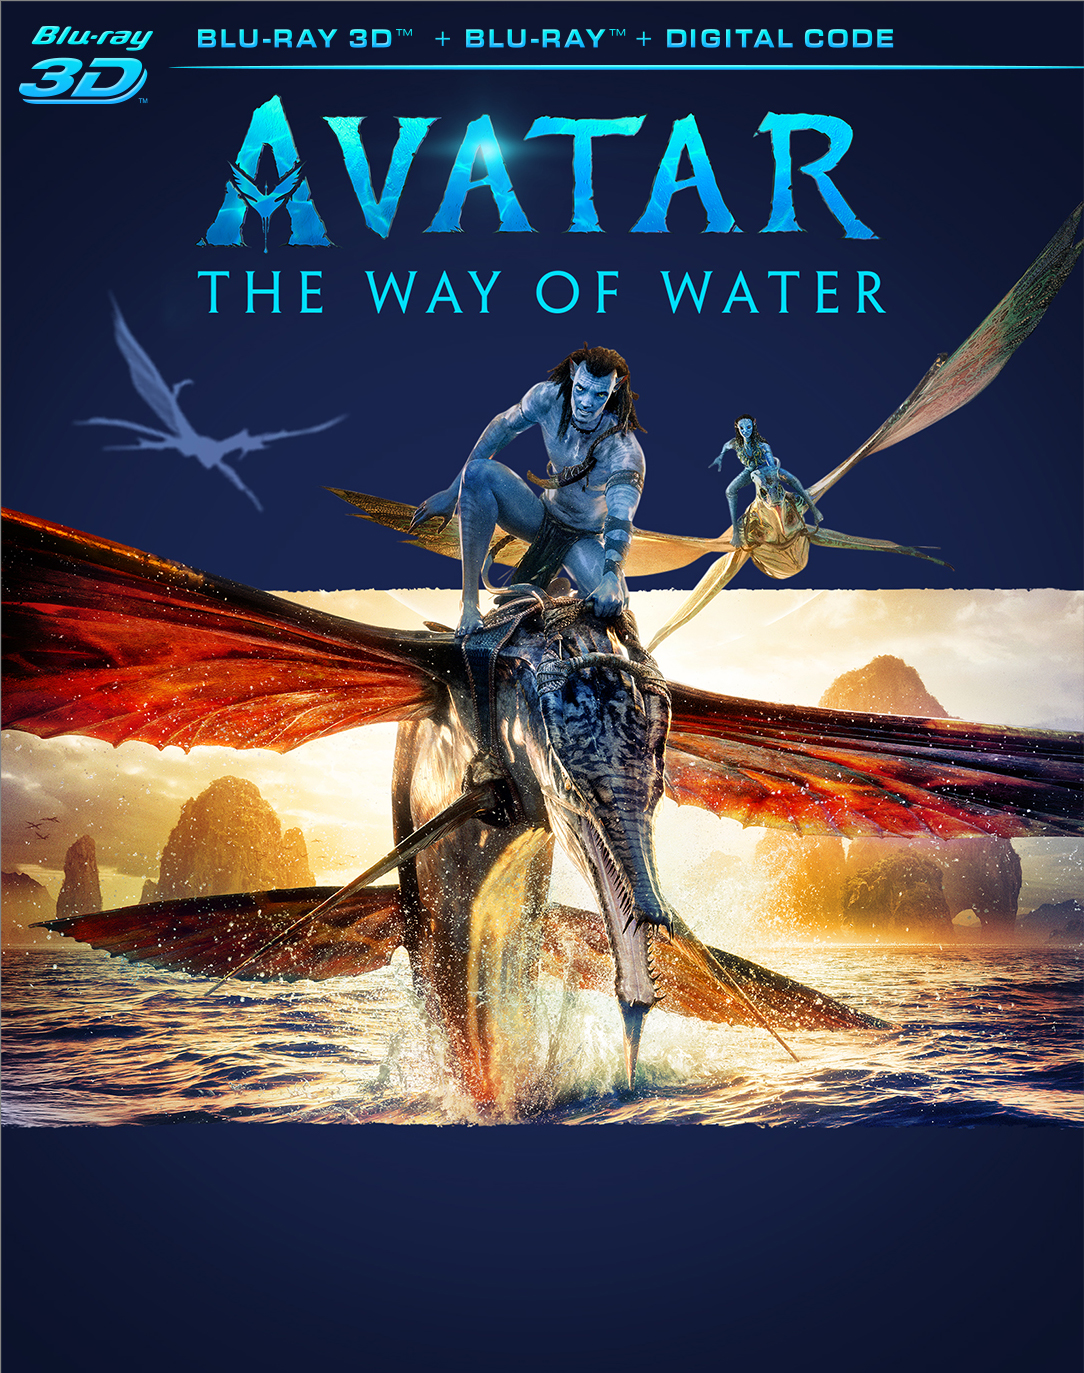 Avatar: The Way of Water [Includes Digital Copy] [3D] [Blu-ray] [2022] -  Best Buy